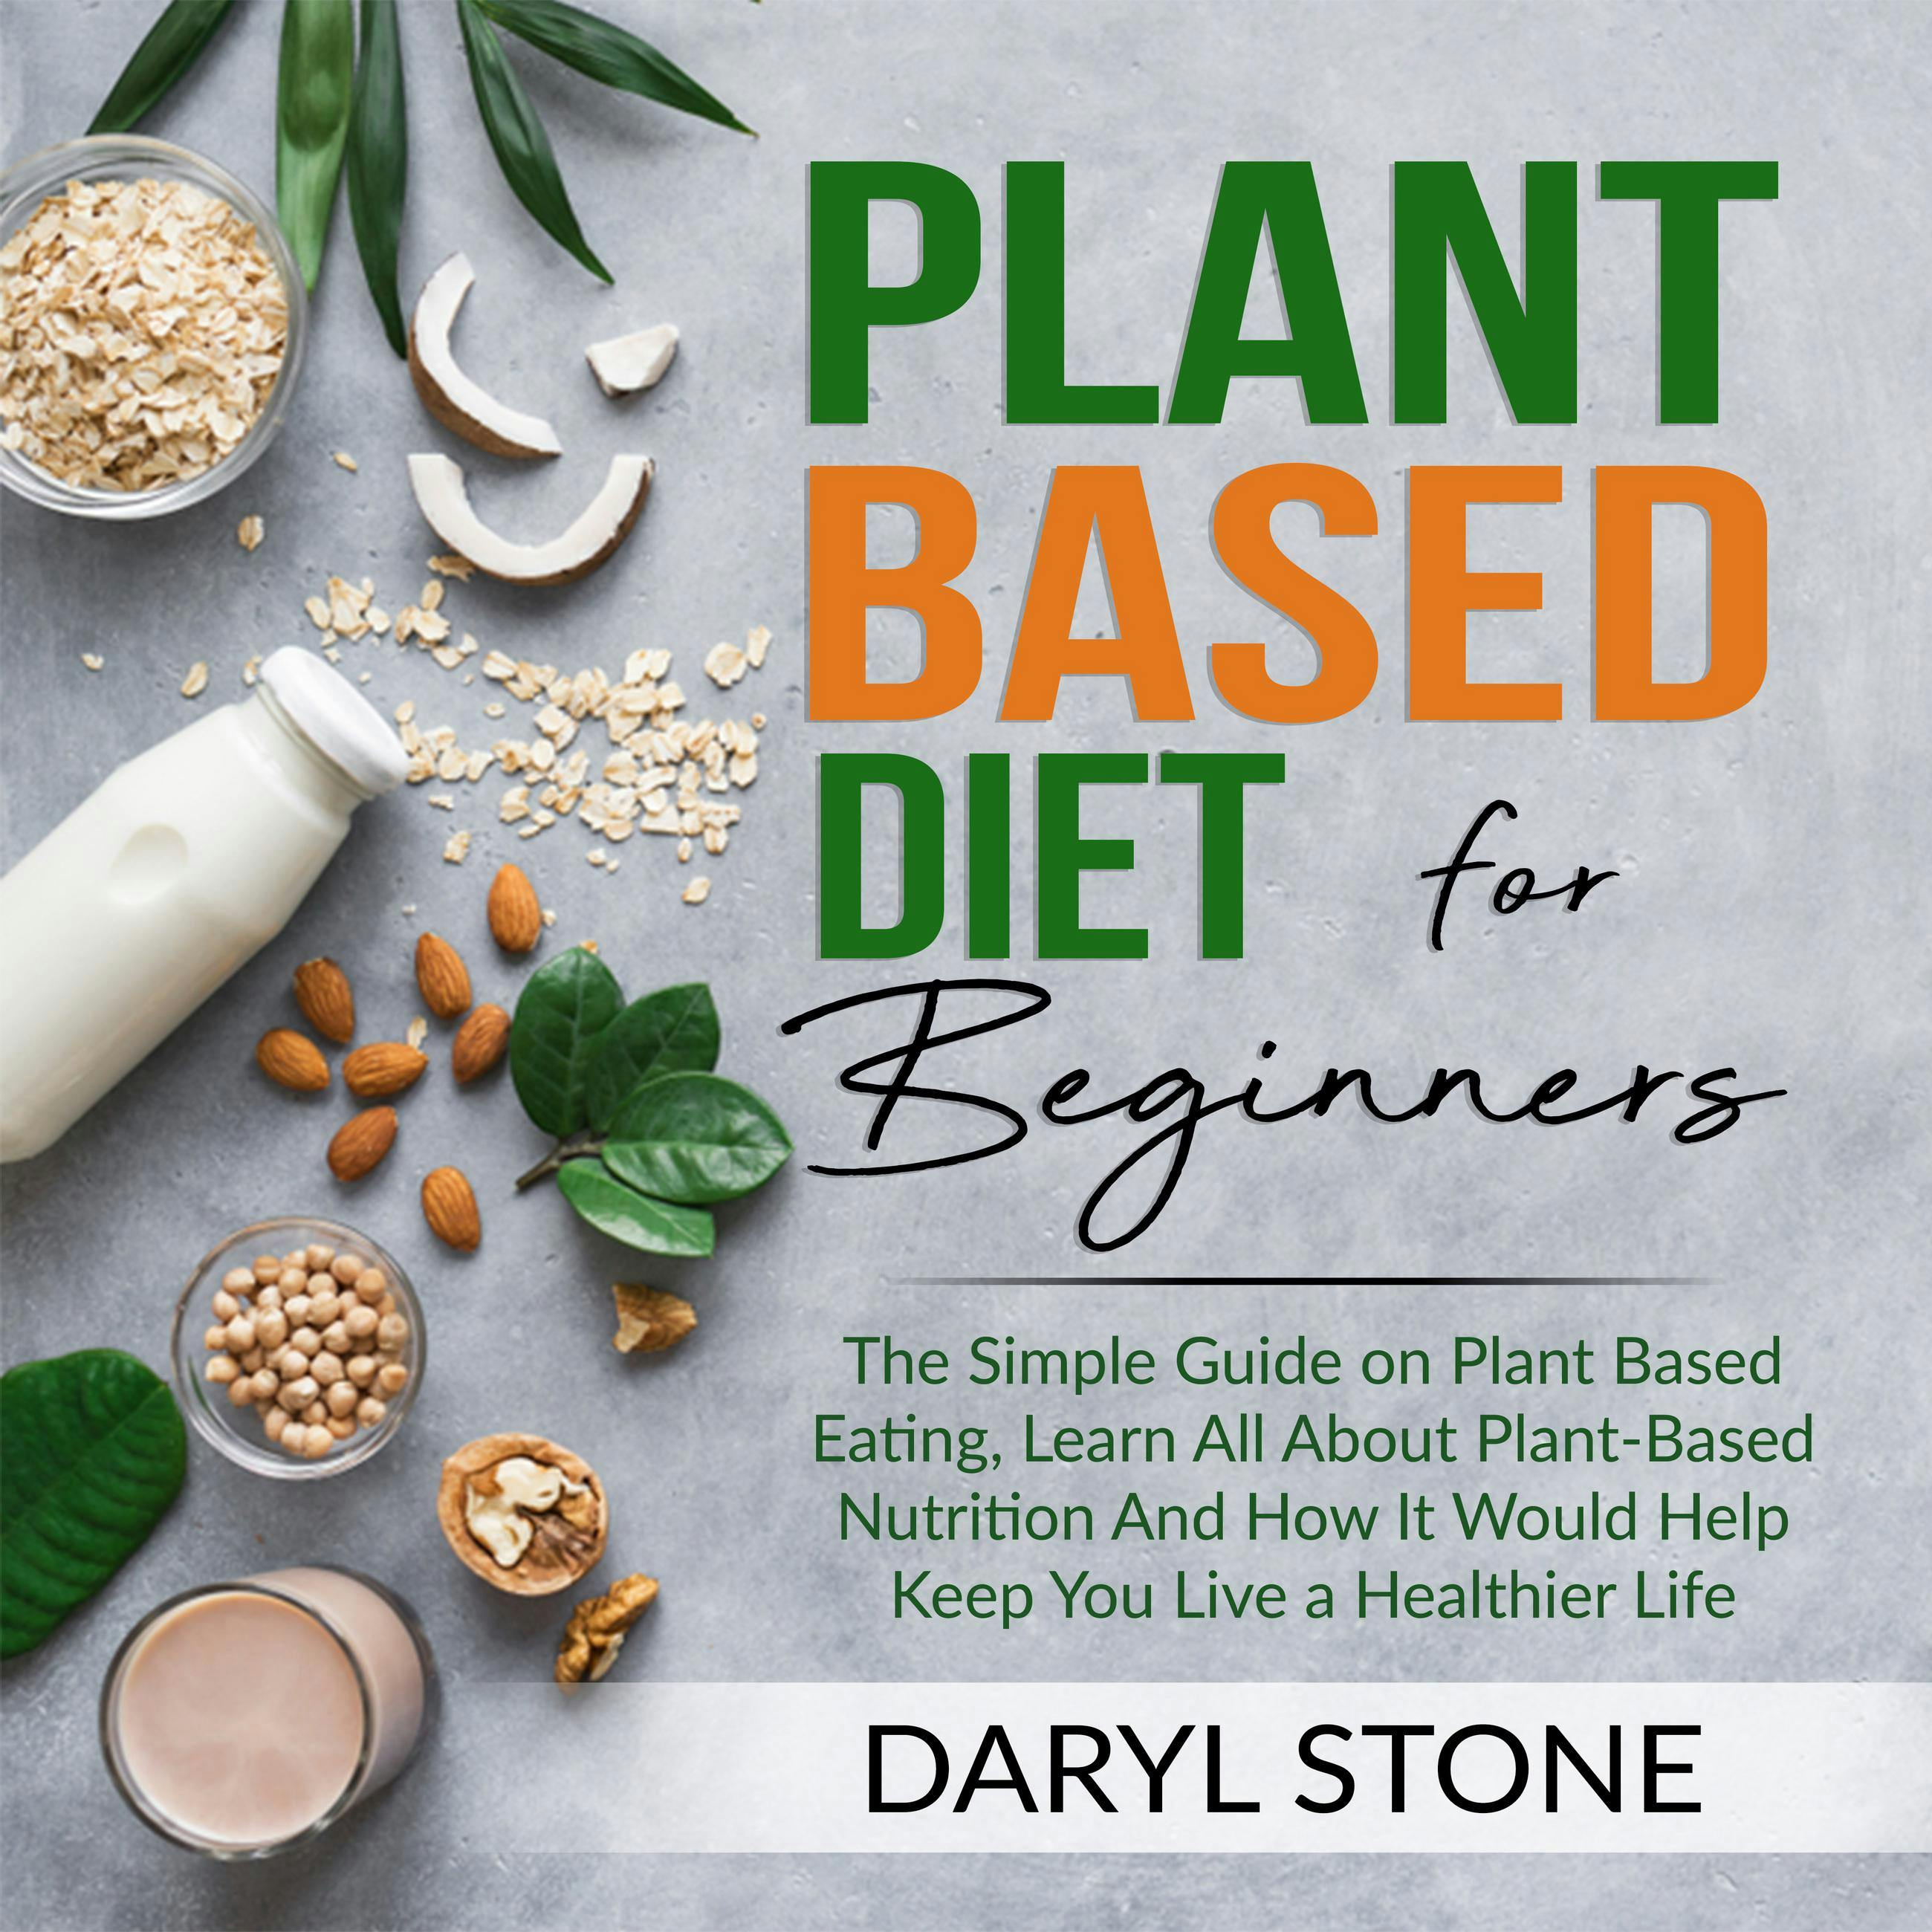 Plant Based Diet for Beginners: The Simple Guide on Plant Based Eating, Learn All About Plant-Based Nutrition And How It Would Help Keep You Live a Healthier Life - undefined